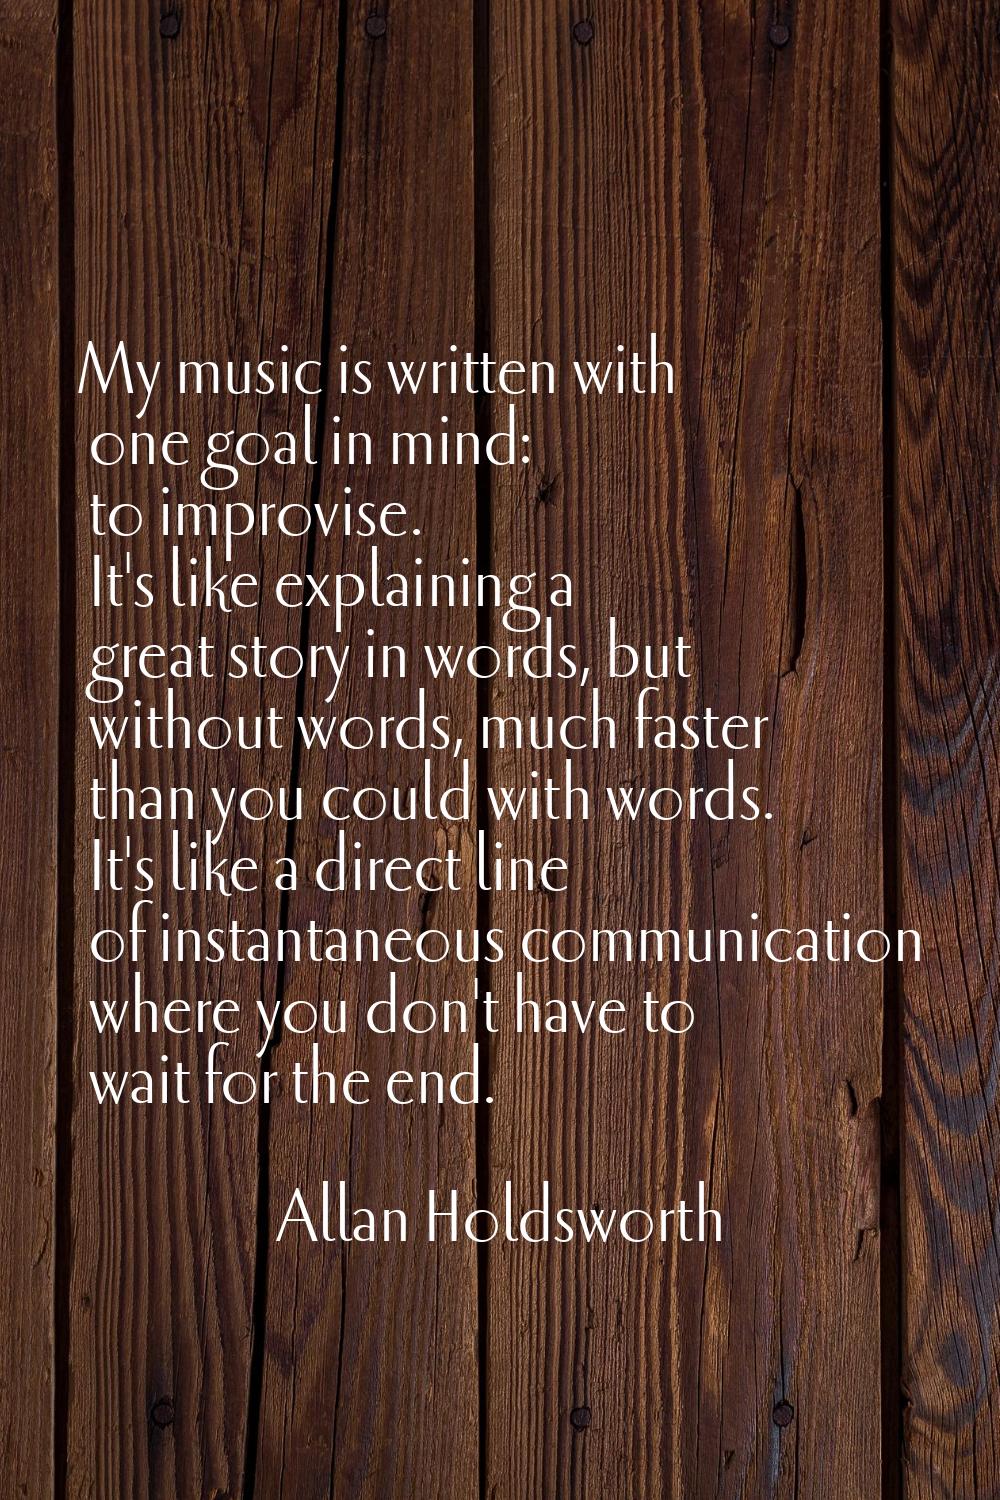 My music is written with one goal in mind: to improvise. It's like explaining a great story in word